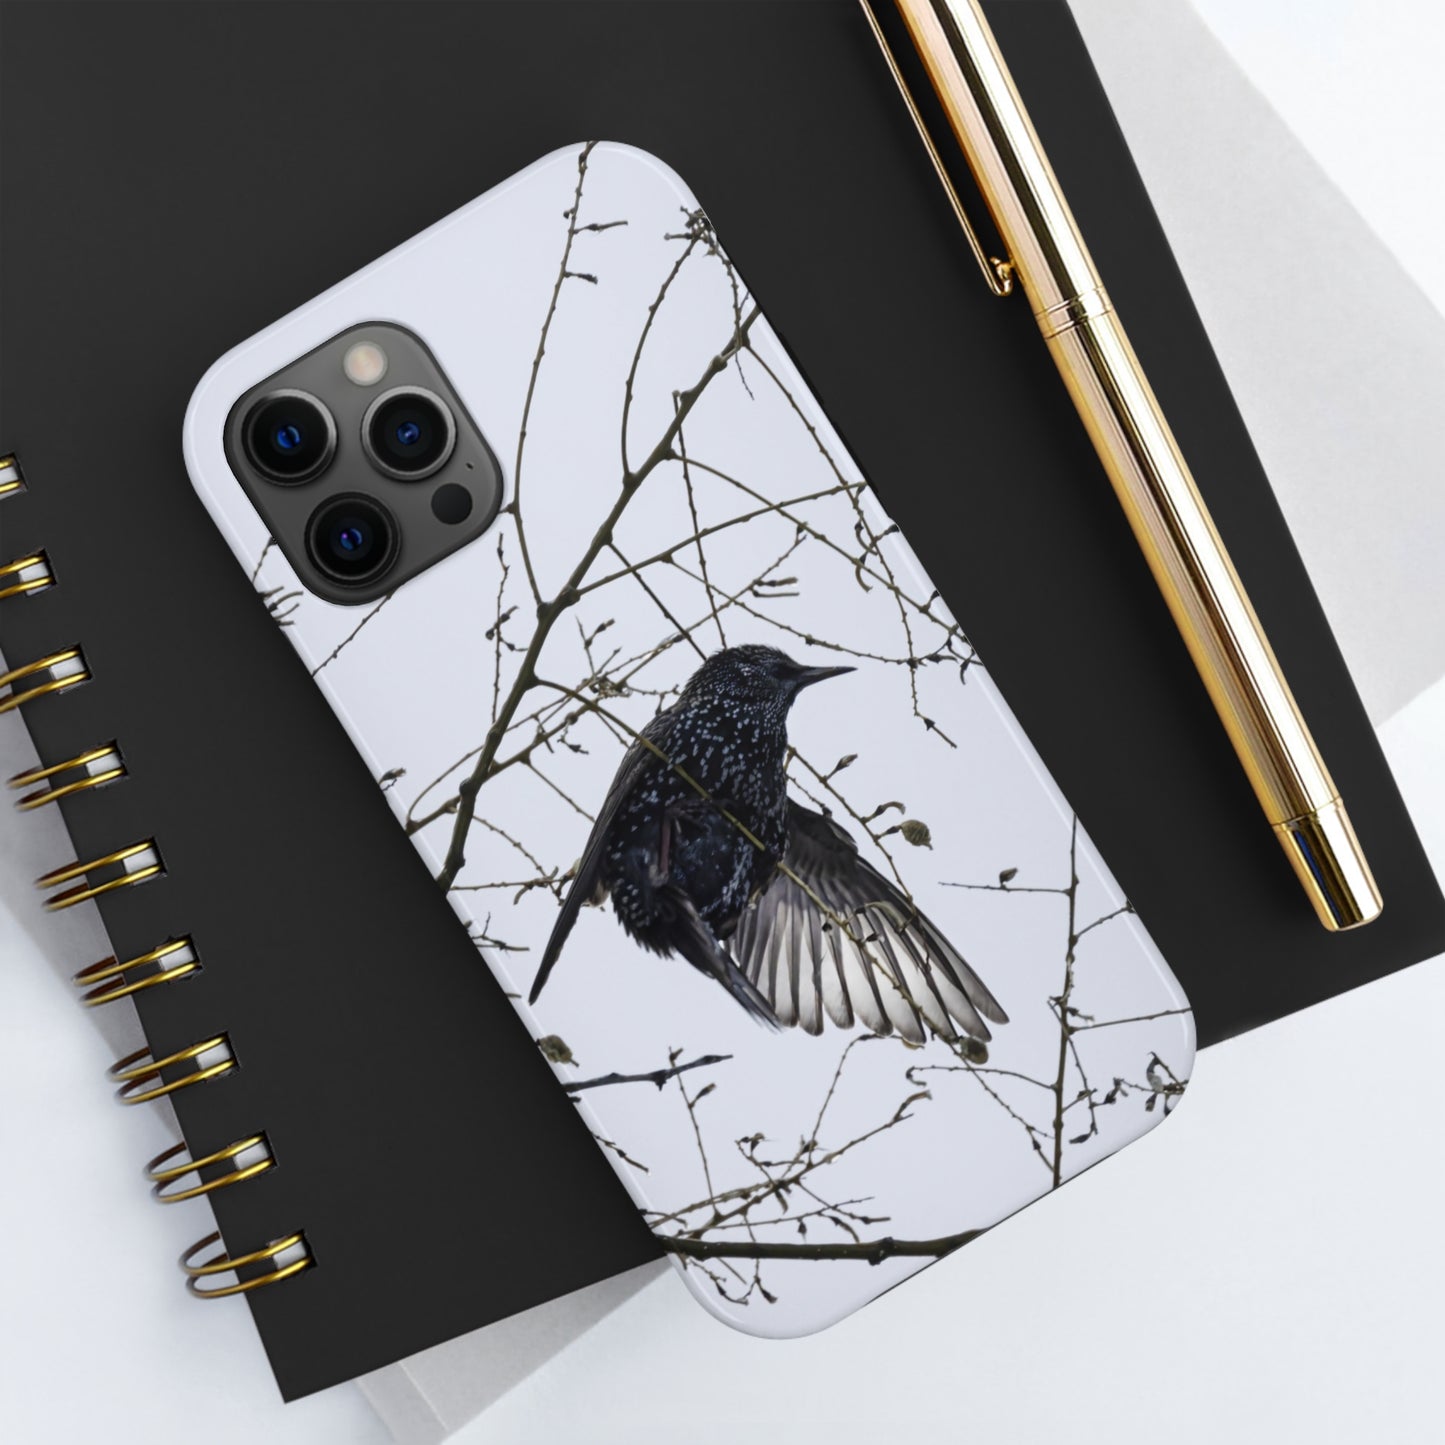 Starling Flap Tough Phone Cases, Case-Mate